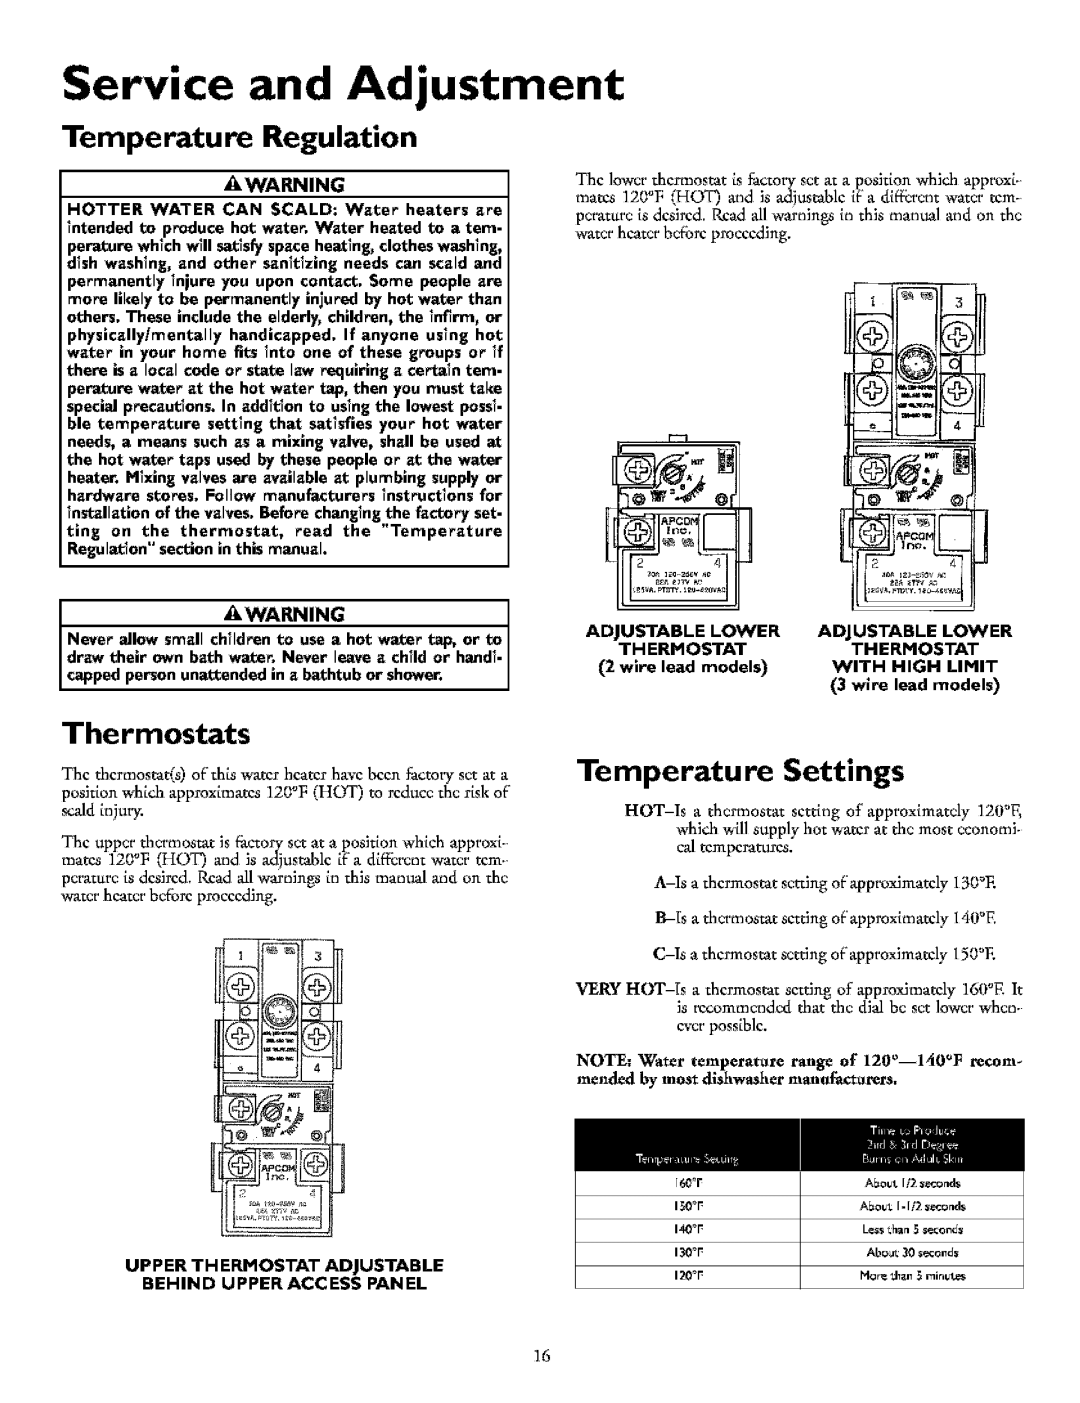 Kenmore 153.32184, 153.321541 Service and Adjustment, Temperature Regulation, Thermostats, Temperature Settings 